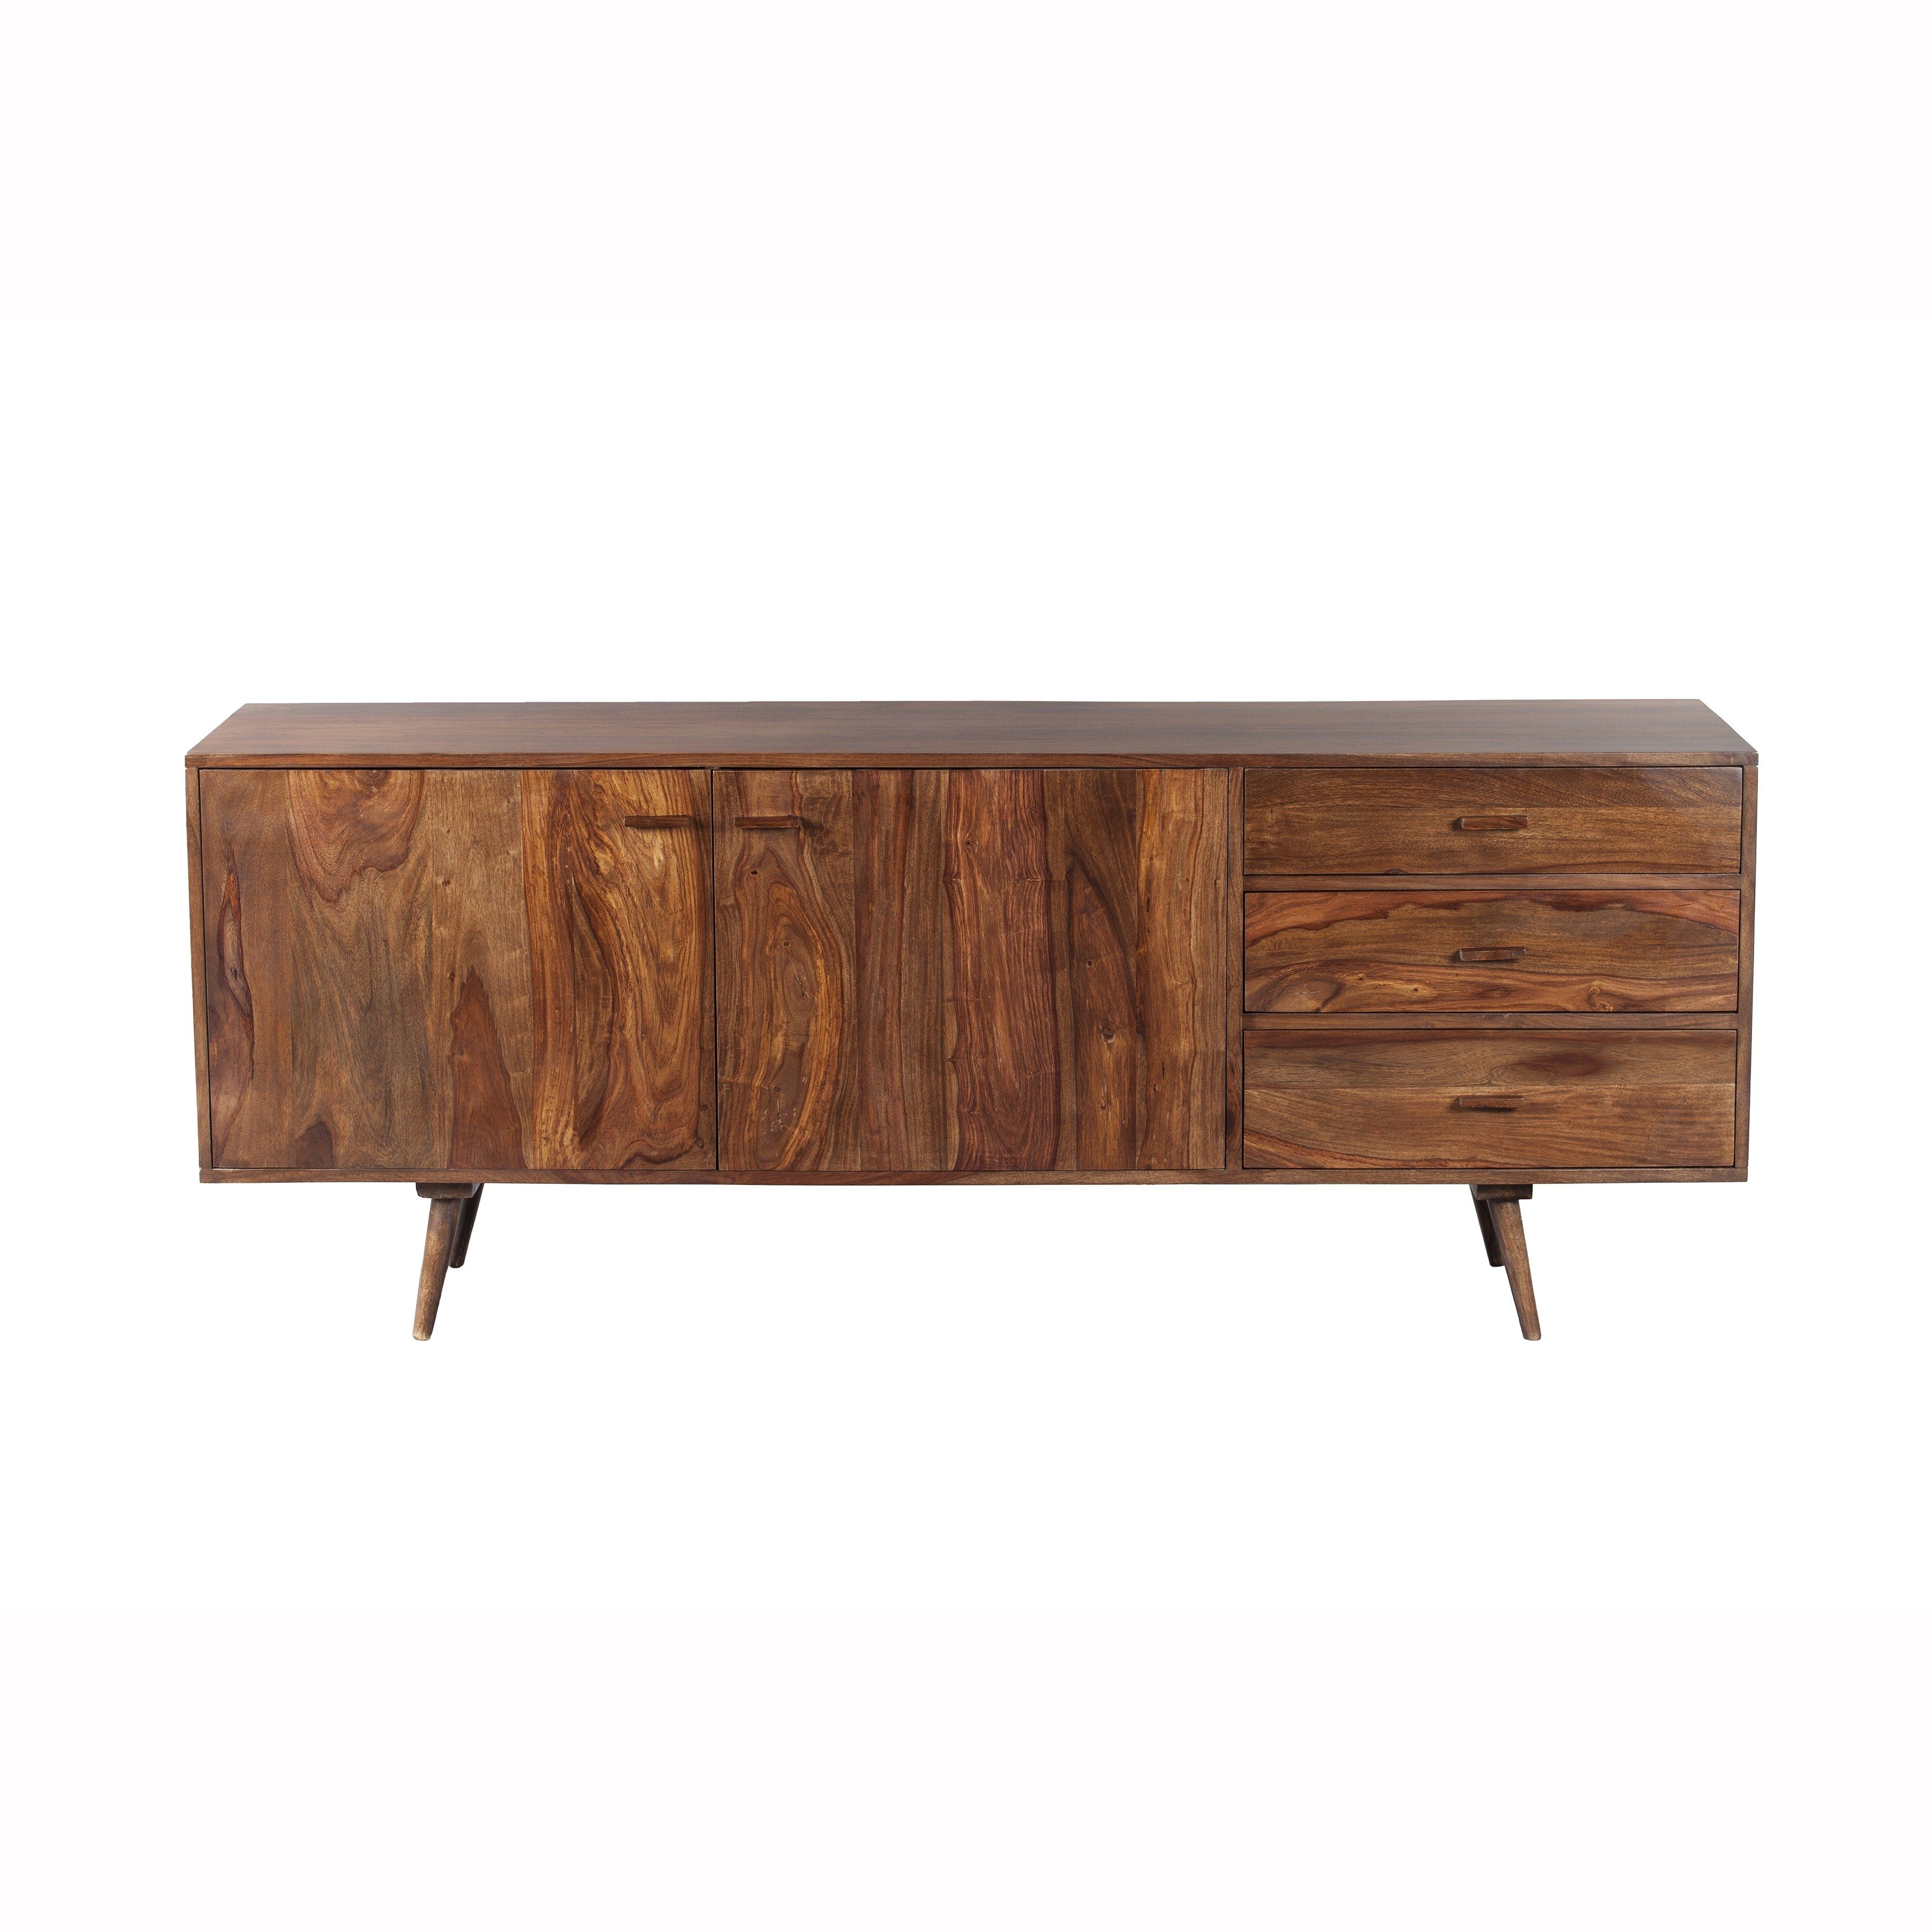 Shop Mandara Handcrafted Solid Sheesham Wood Mid Century Console Intended For Mandara 3 Drawer 2 Door Sideboards (View 9 of 30)